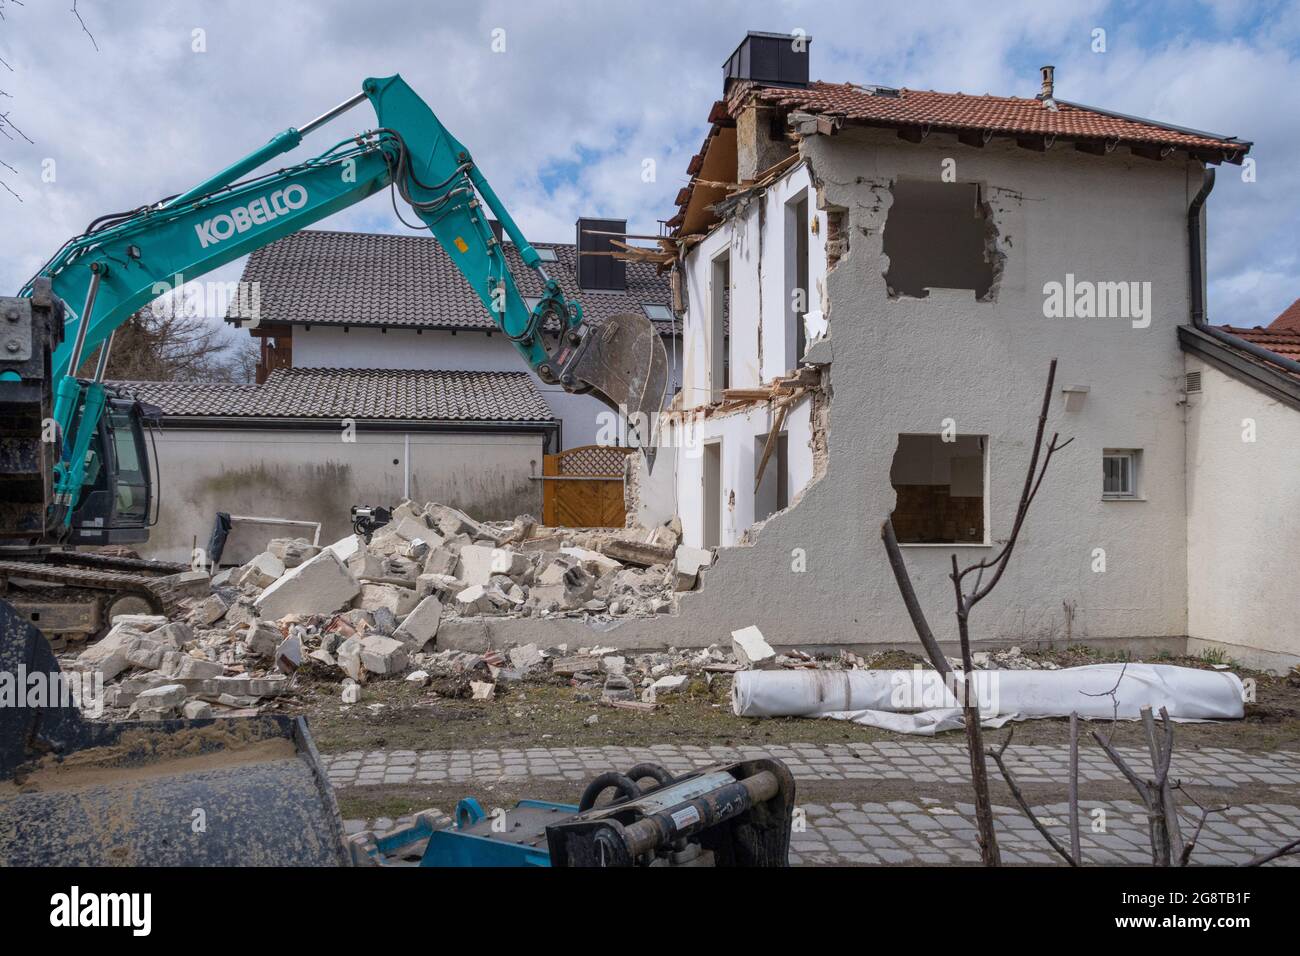 Excavator demolishes small residential building from 1950, urban consolidation, Germany, Bavaria, Dorfen Stock Photo